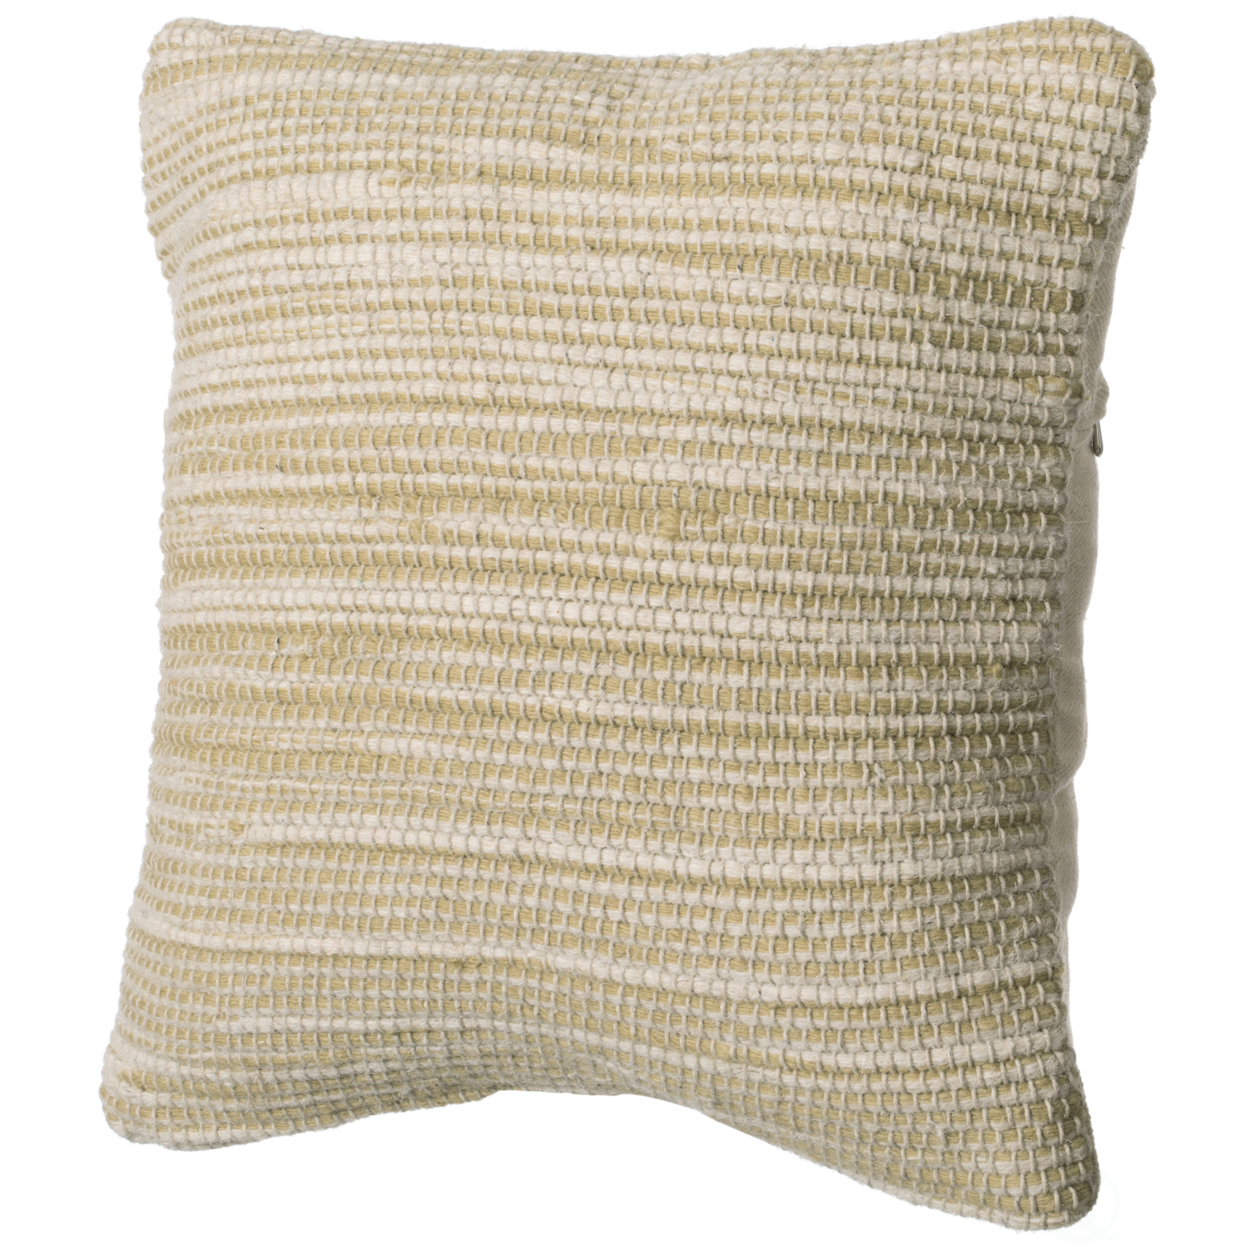 16 Handwoven Wool & Cotton Throw Pillow Cover With Woven Knit Texture - Sand With Cushion